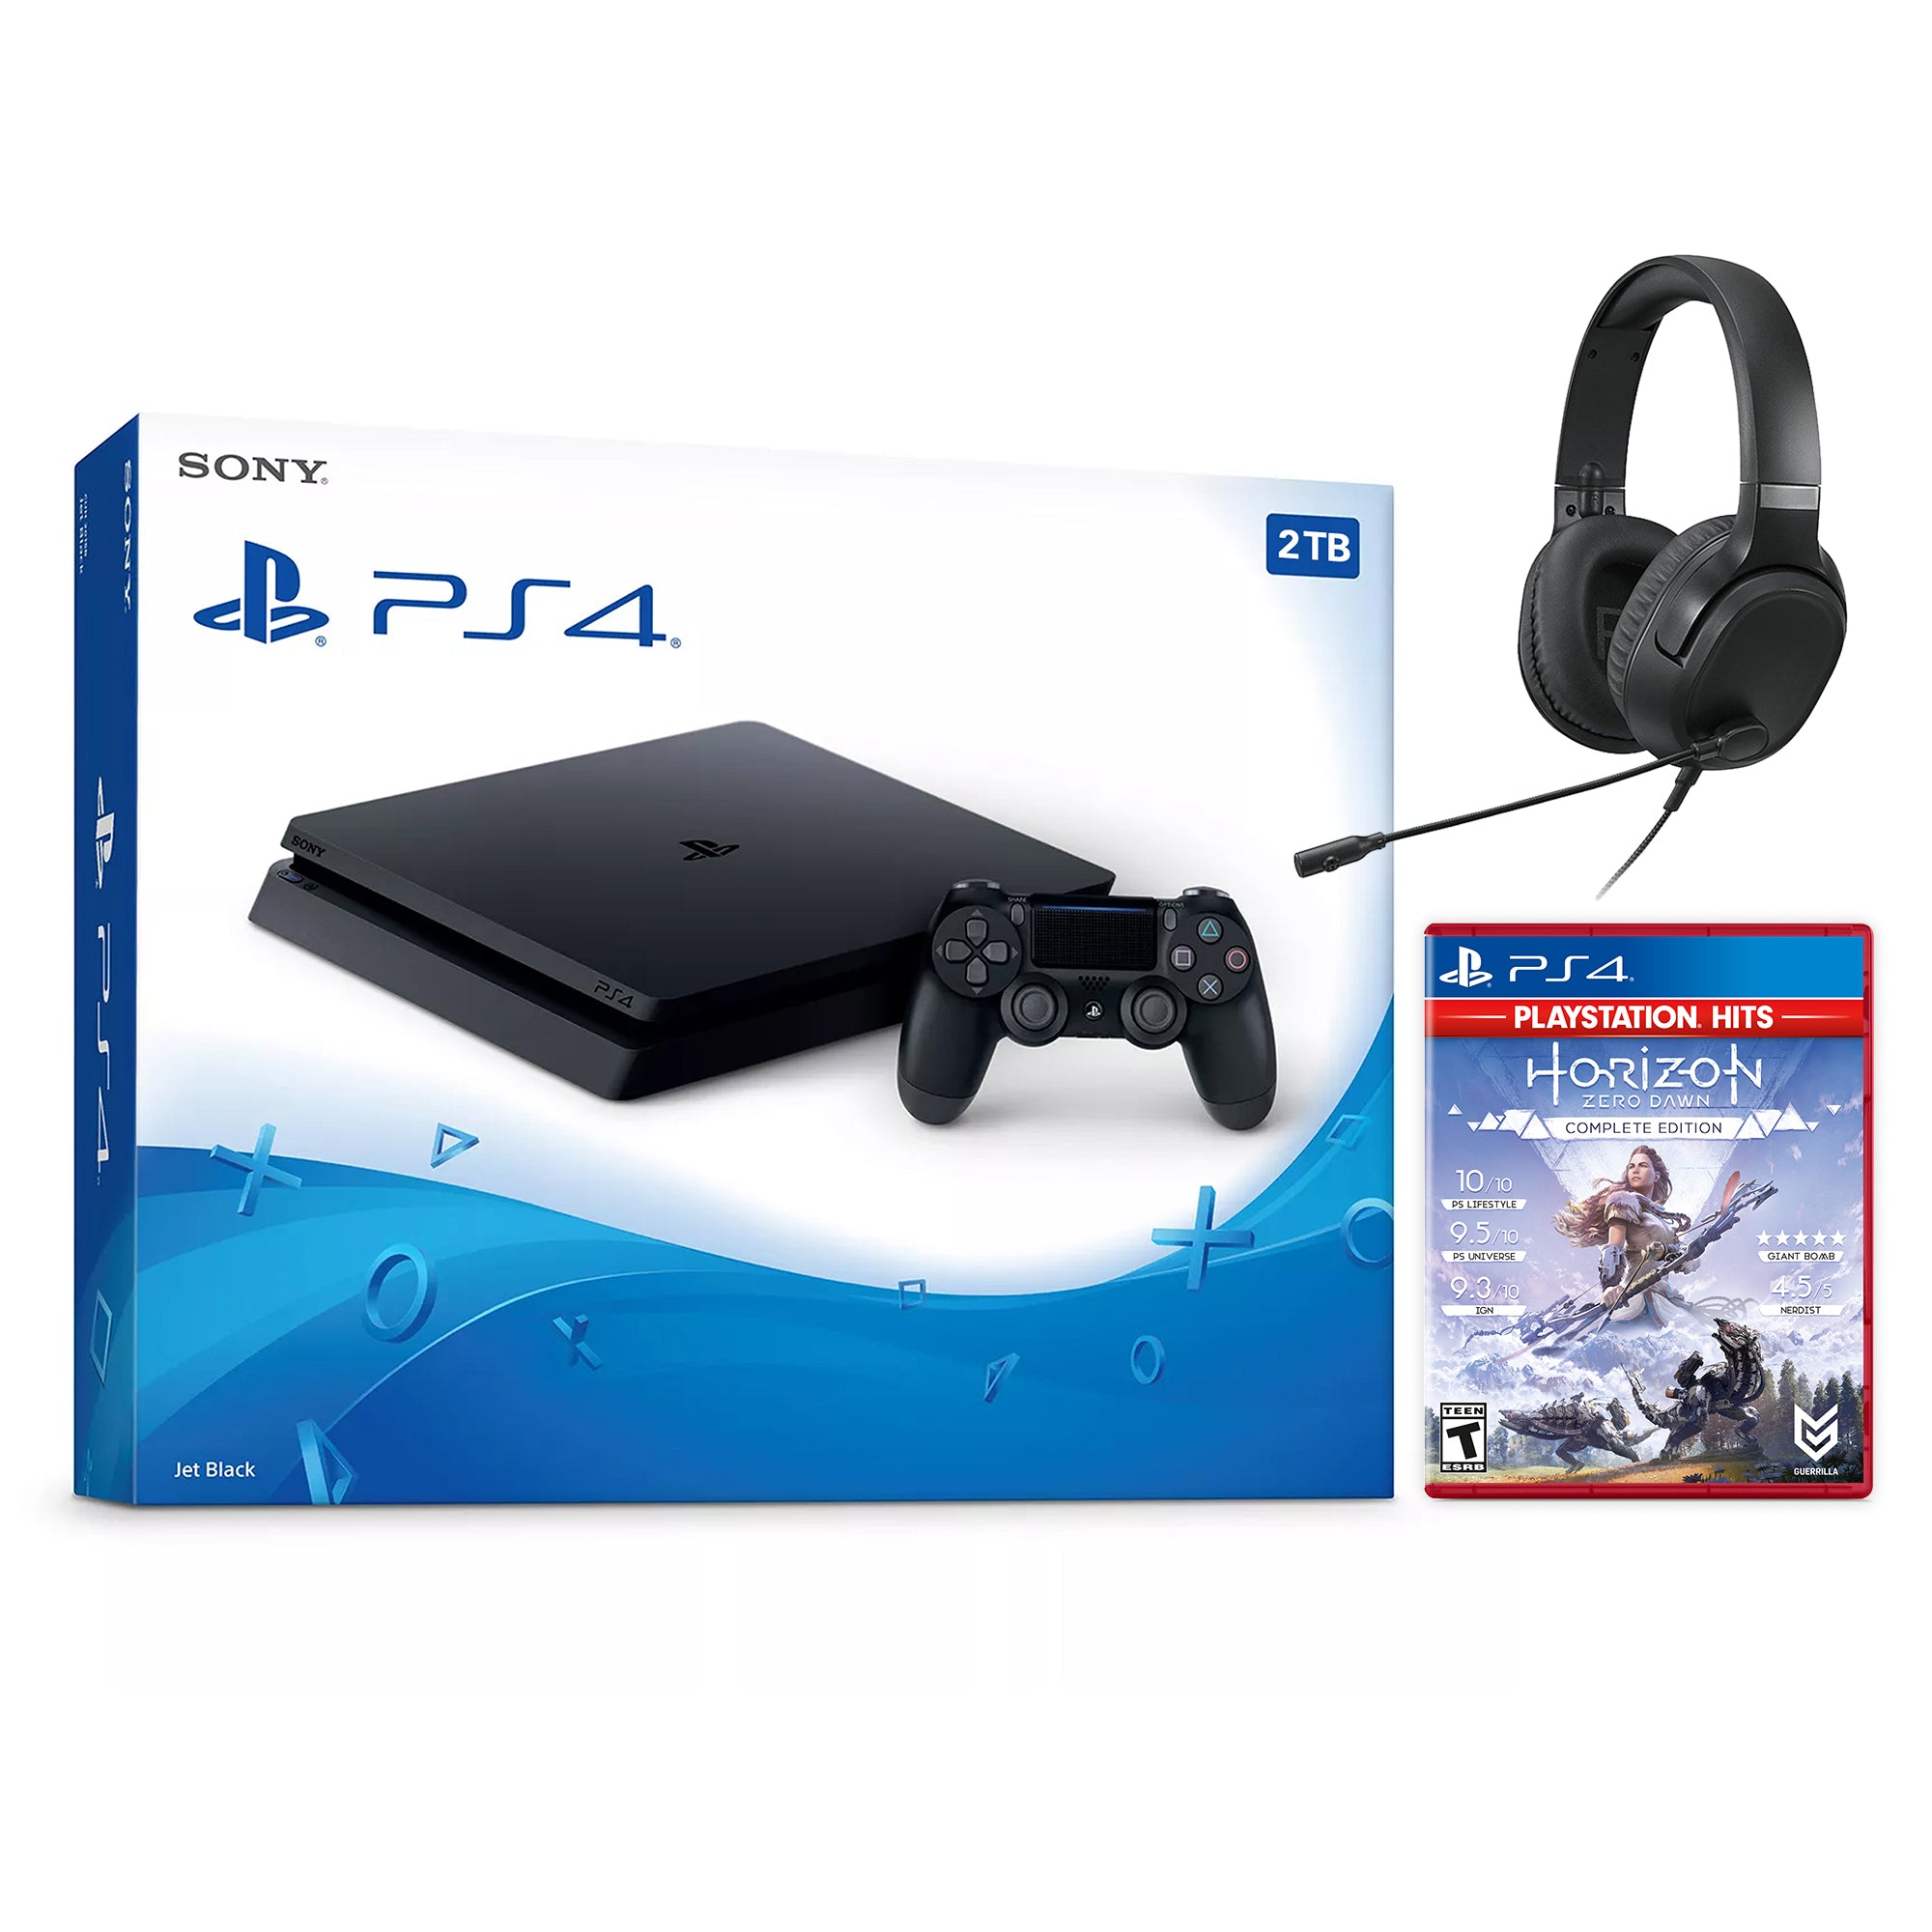 Sony PlayStation 4 Slim Call of Duty Vanguard Bundle Upgrade 2TB HDD PS4 Gaming Console, Jet Black, with Mytrix Chat Headset - Large Capacity Internal Hard Drive Enhanced PS4 Console